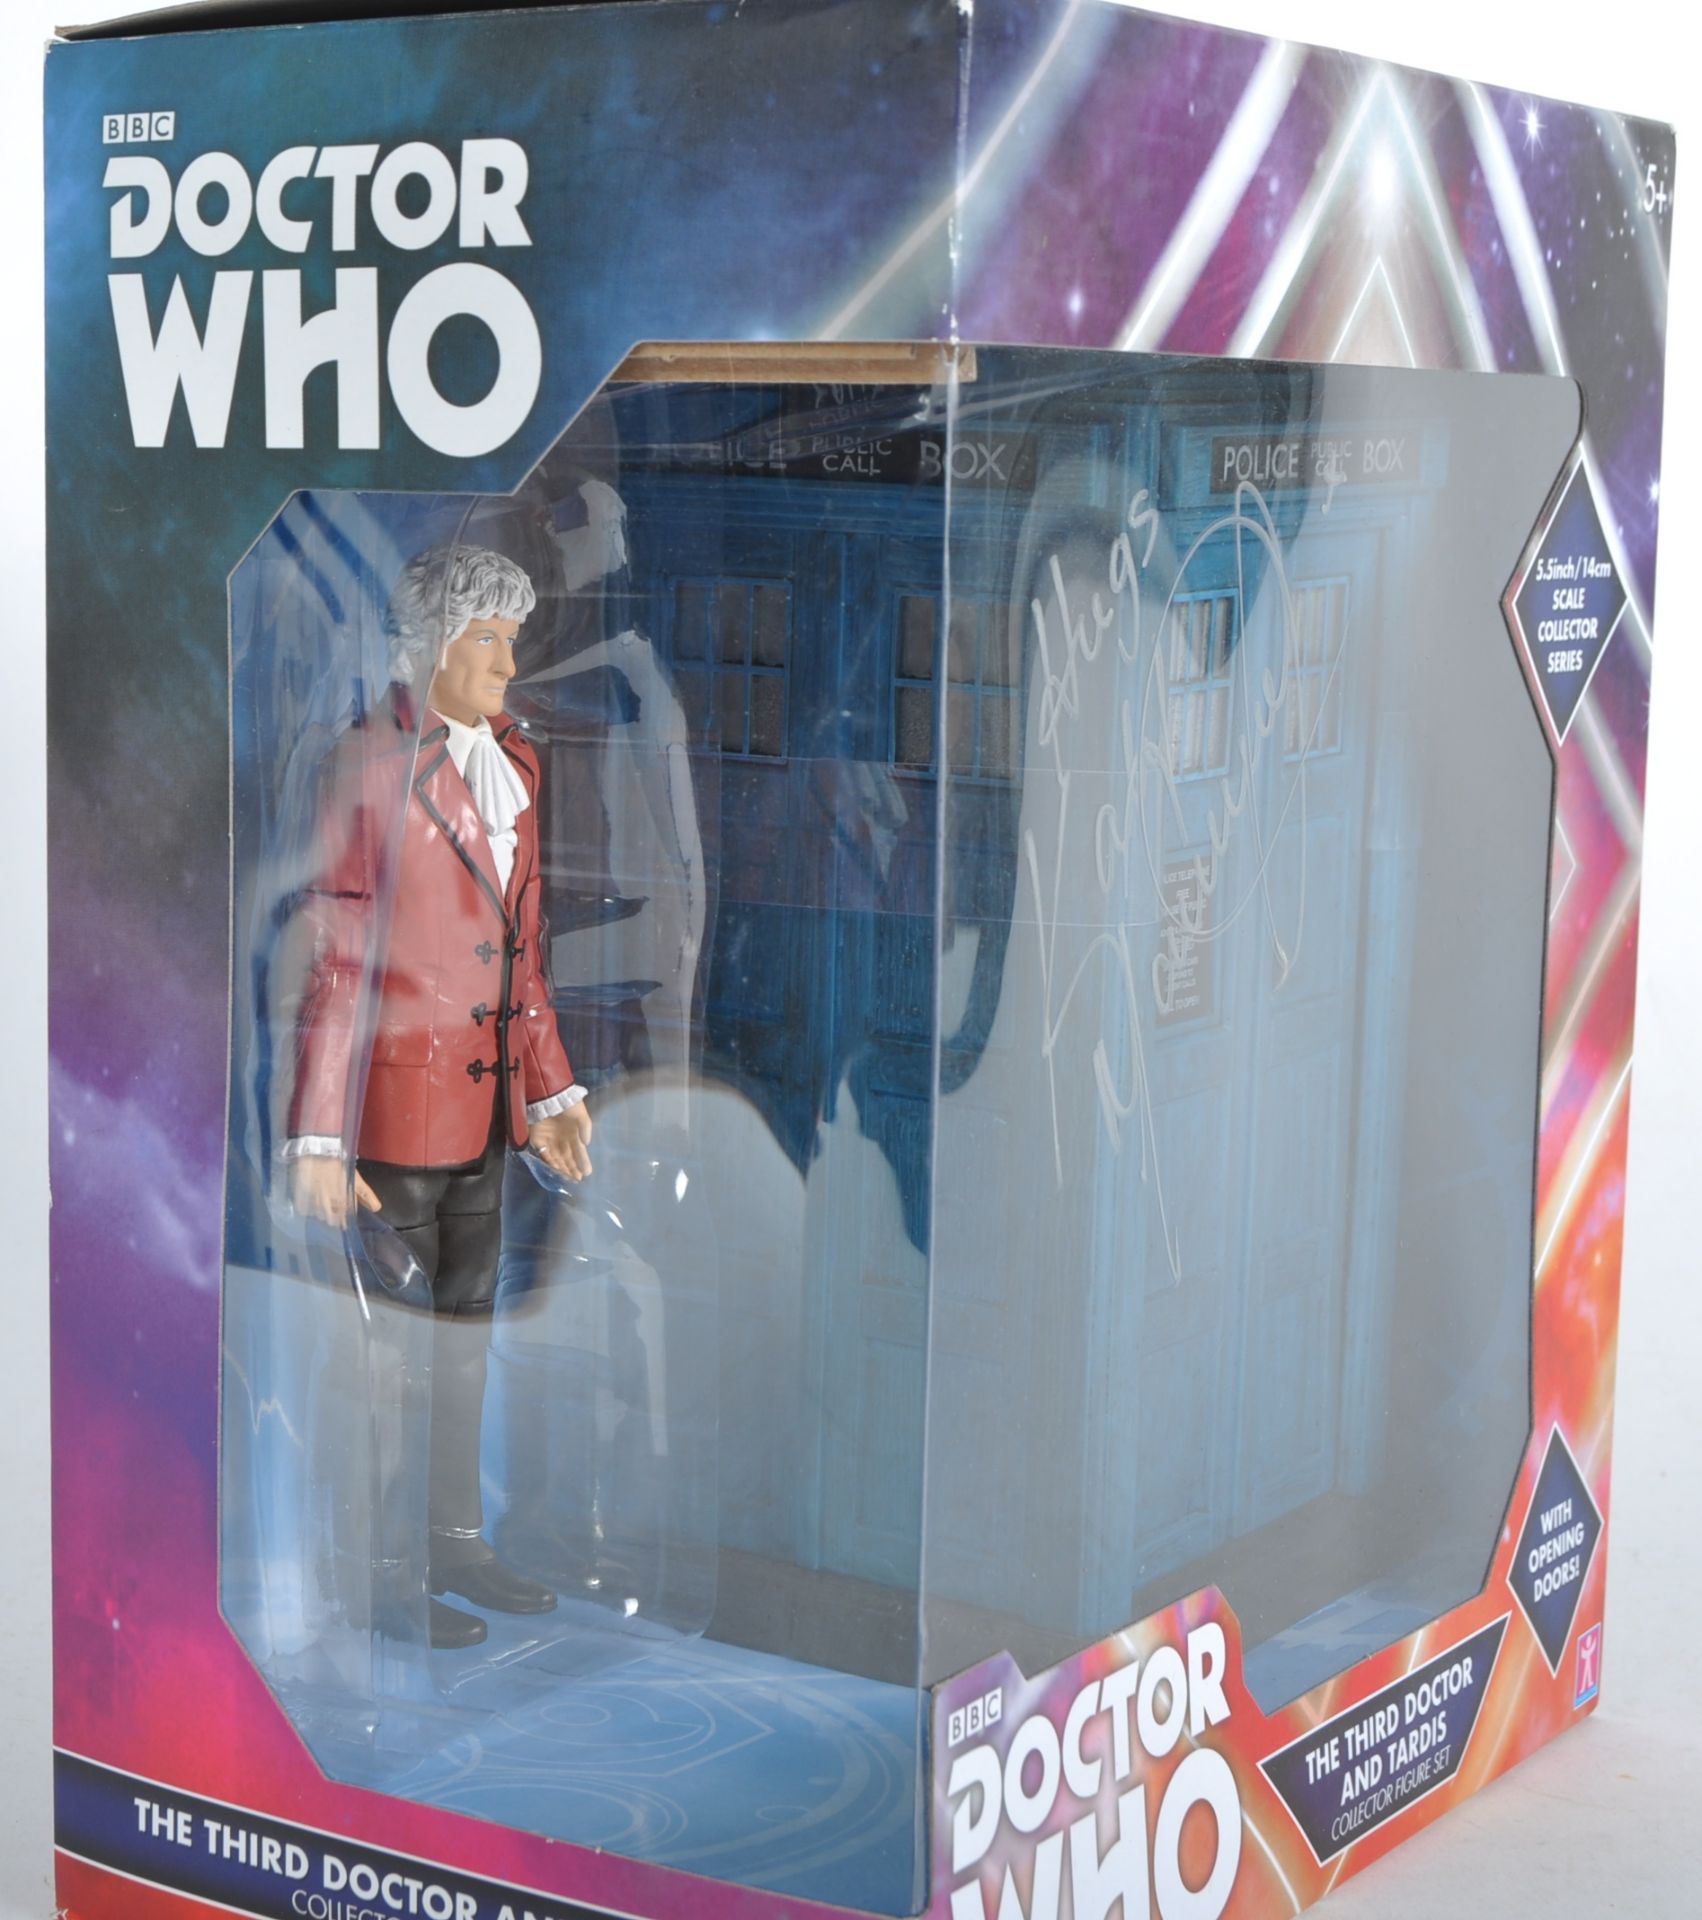 DOCTOR WHO - KATY MANNING (JO) - AUTOGRAPHED TARDIS ACTION FIGURE - Image 3 of 3